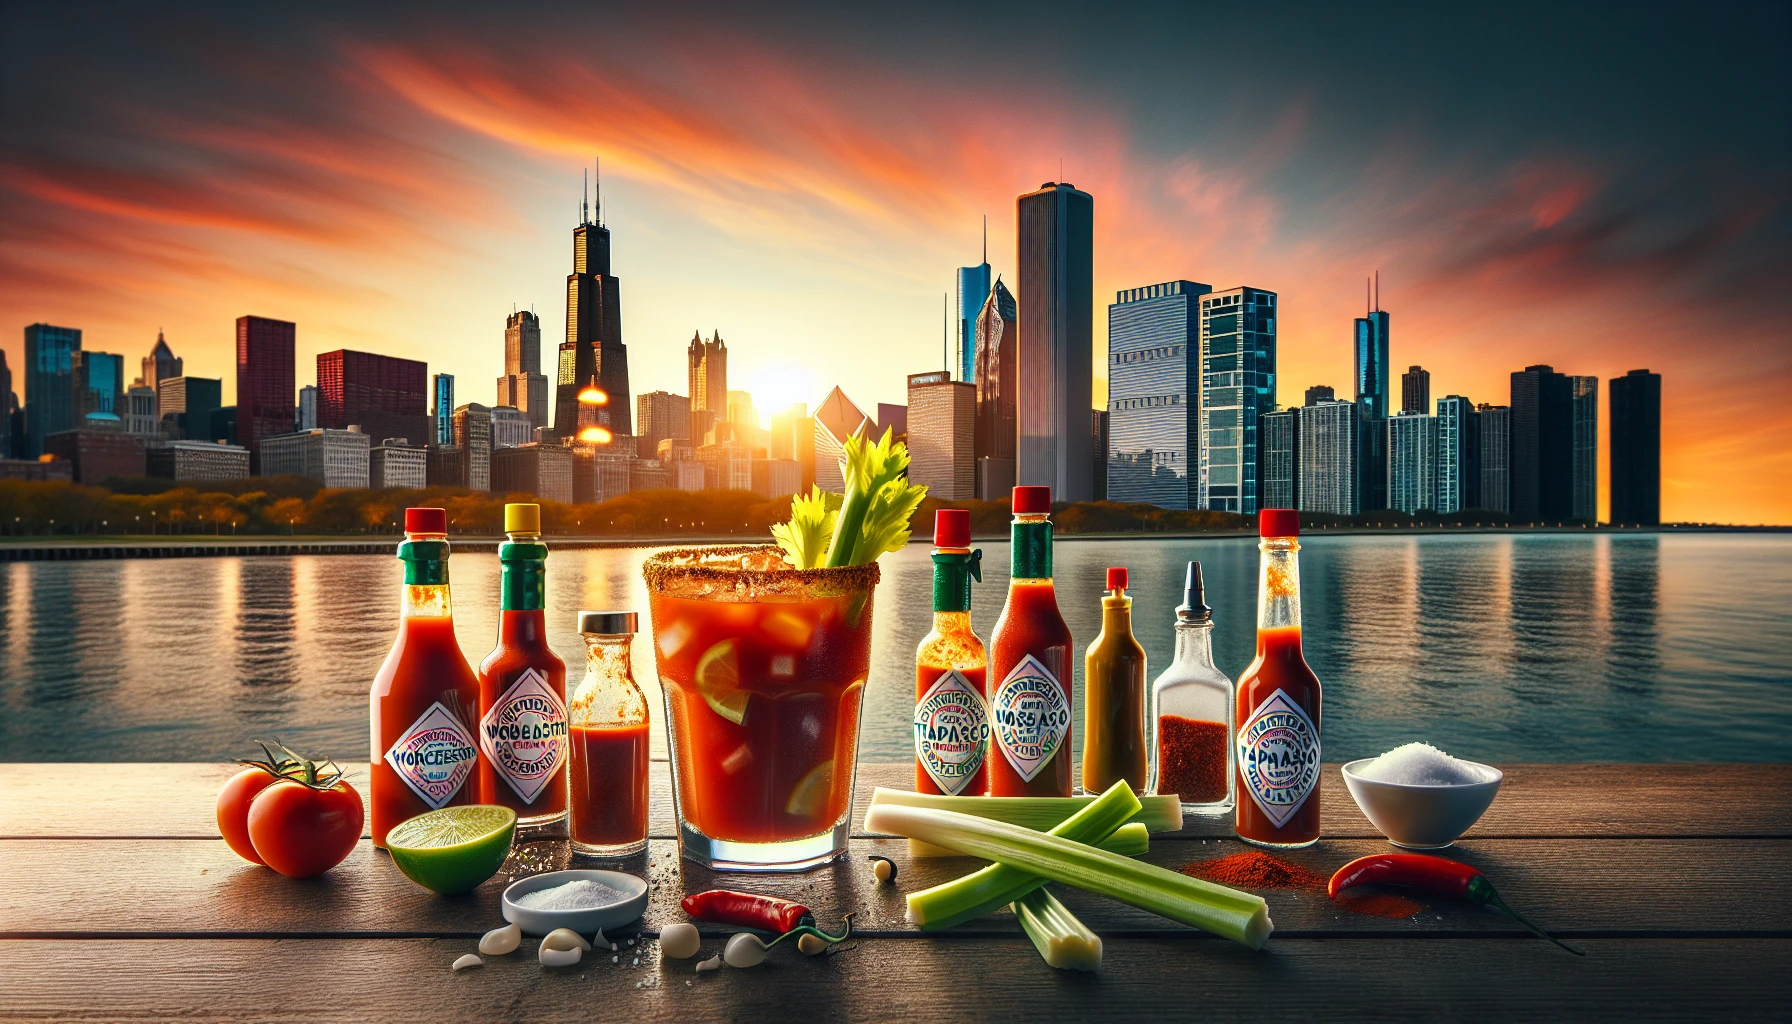 Bloody Mary Ingredients in Chicago: Delightfully Disturbing